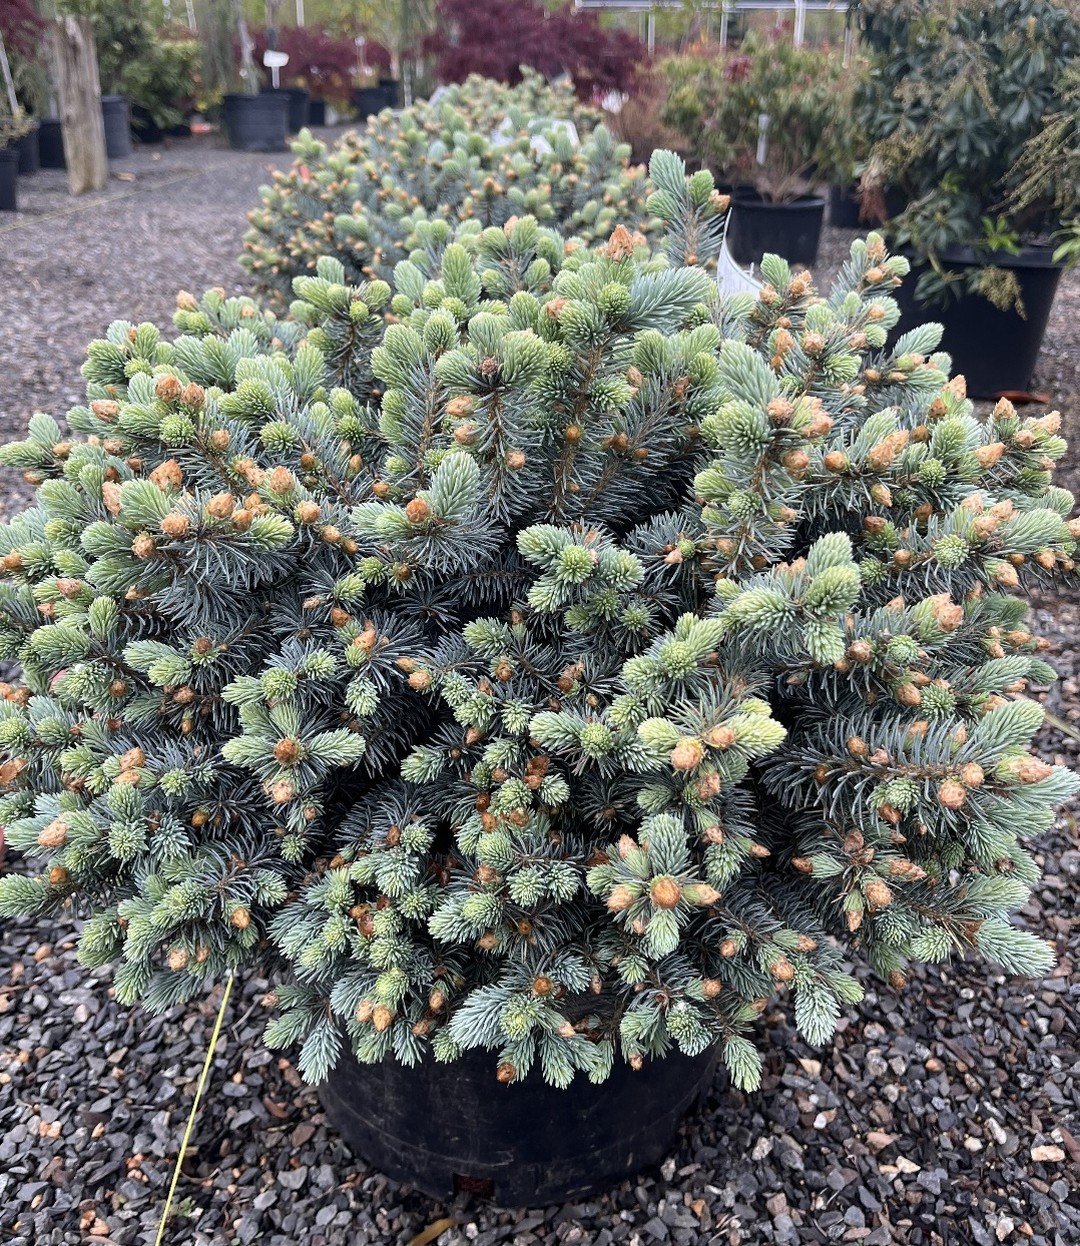 Plant of the Week! Picea pungens &lsquo;Glauca Globosa - Commonly known as Dwarf Blue Spruce, this lovely globe-shaped, evergreen shrub can grow 3-5 feet tall and 4-6 feet wide. The blue needles, brightest when they first emerge in spring, will hold 